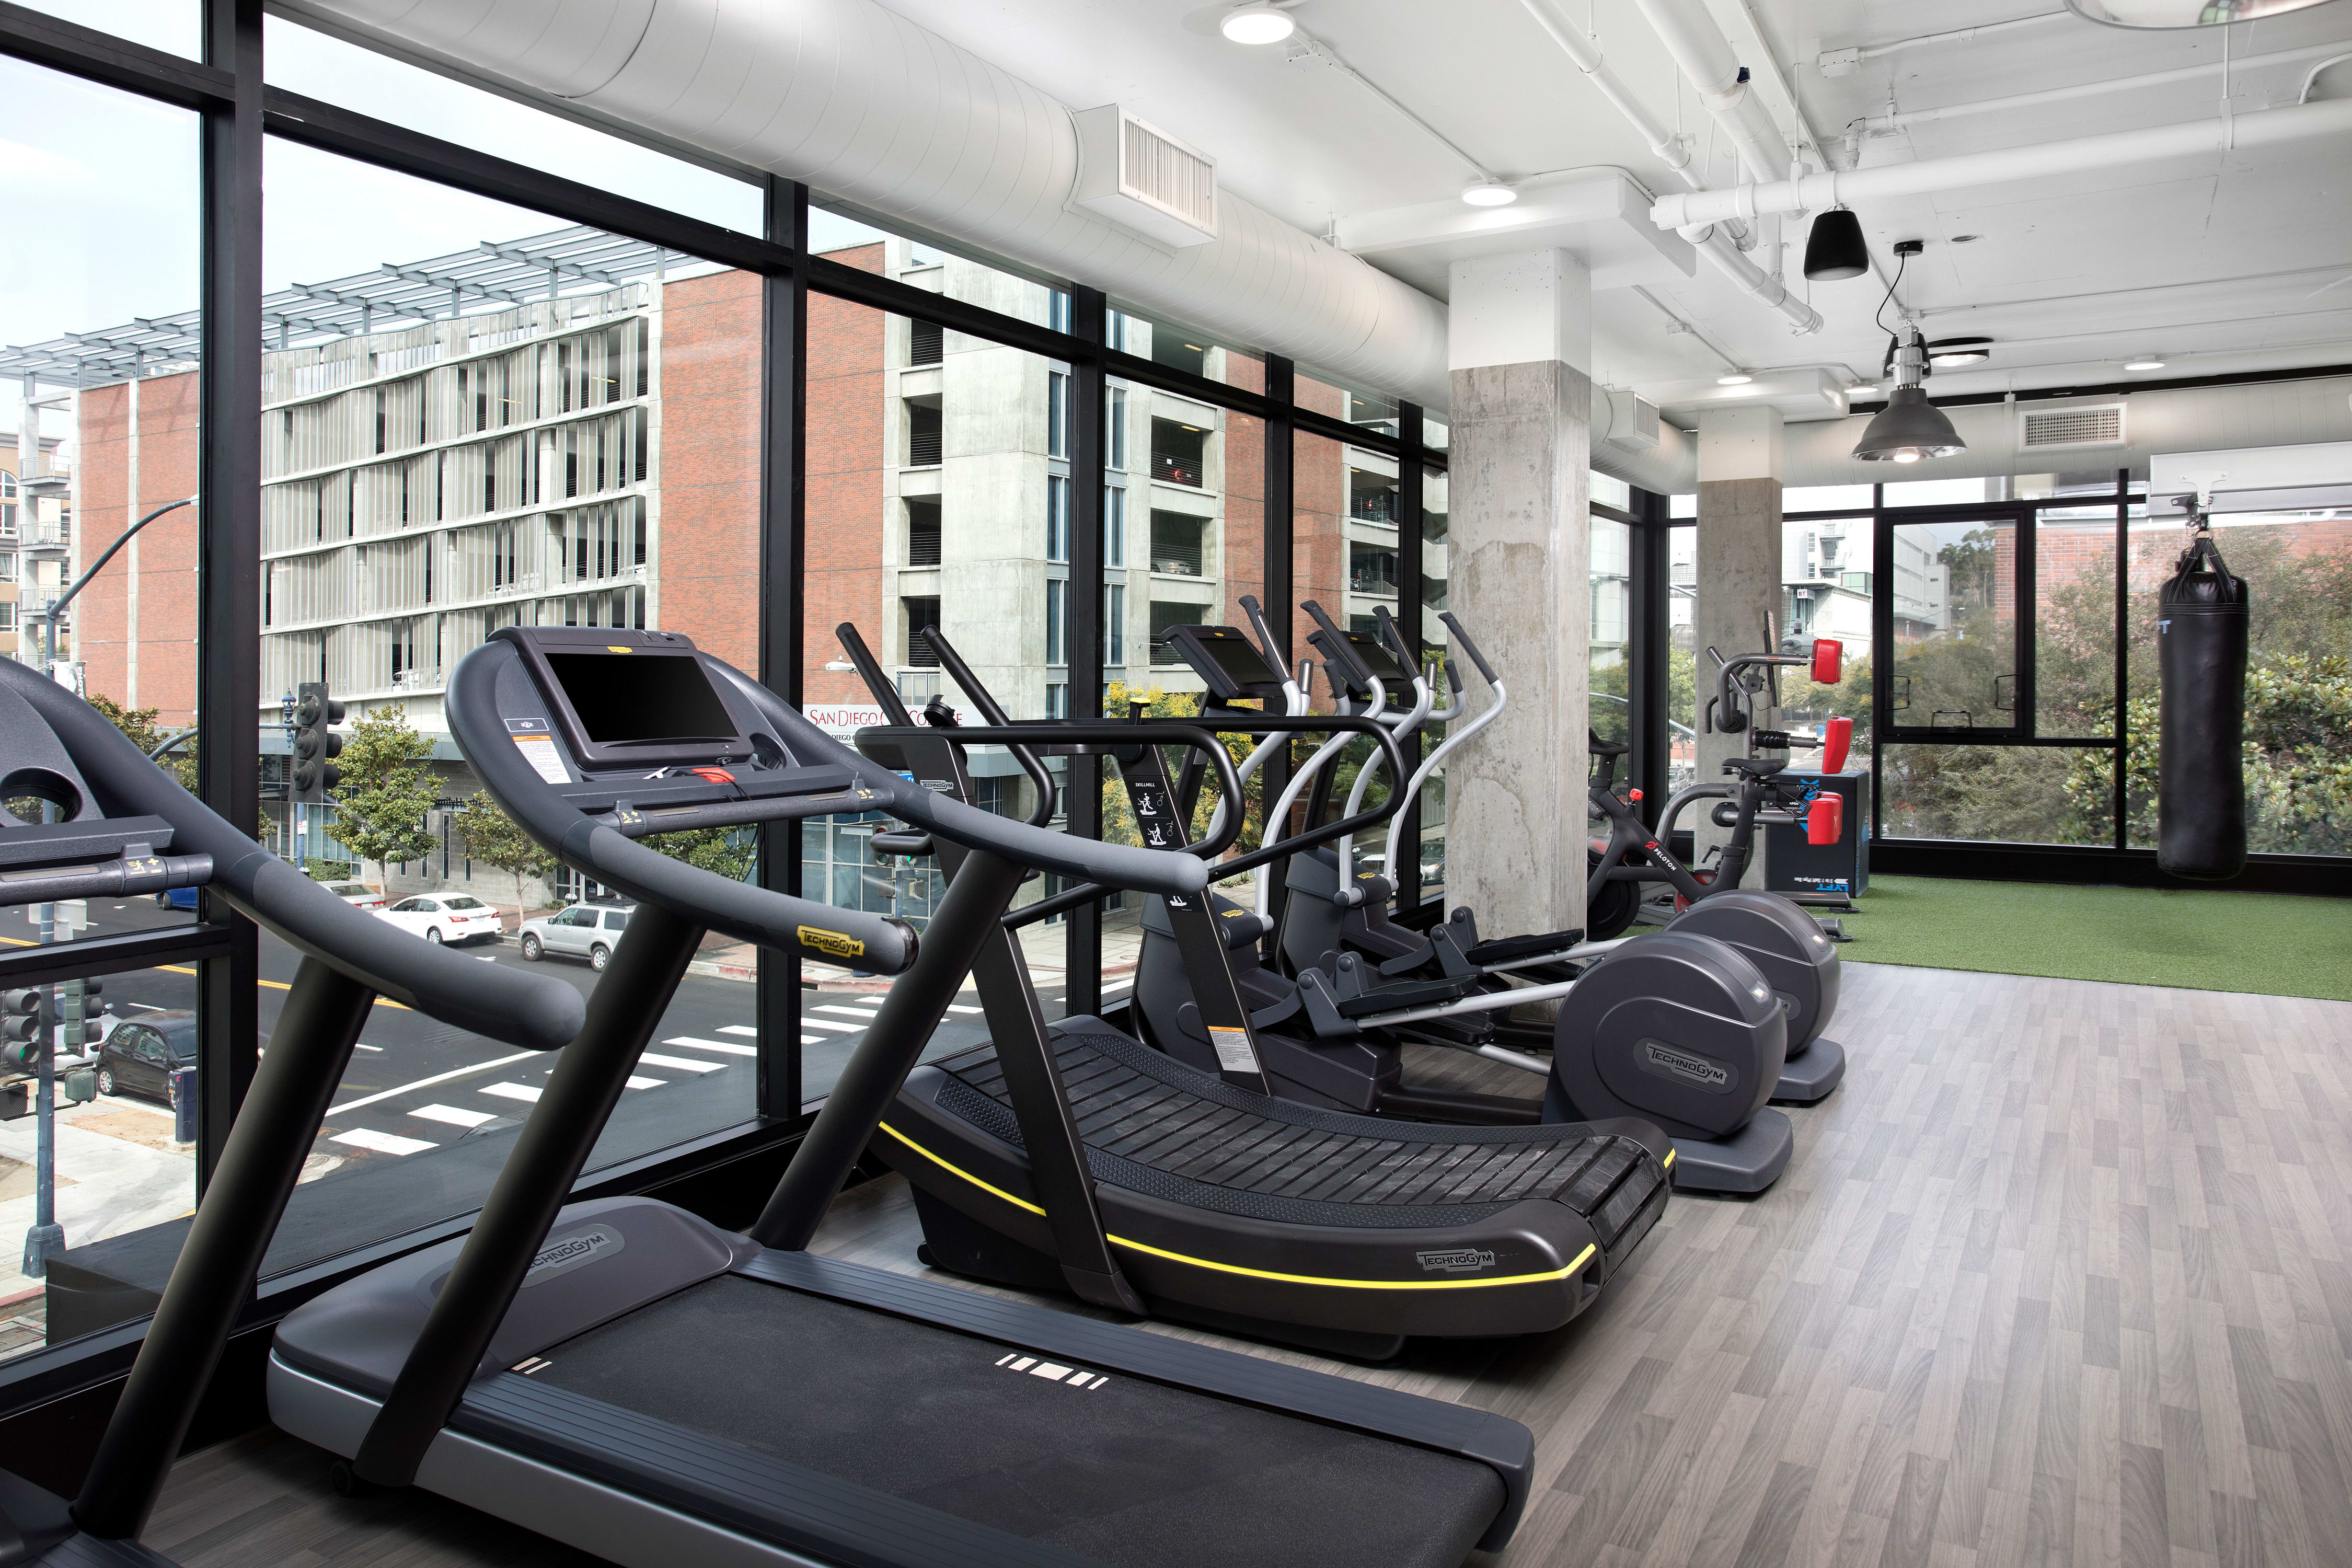 Treadmills in our fitness center at The Artisan in San Diego, California